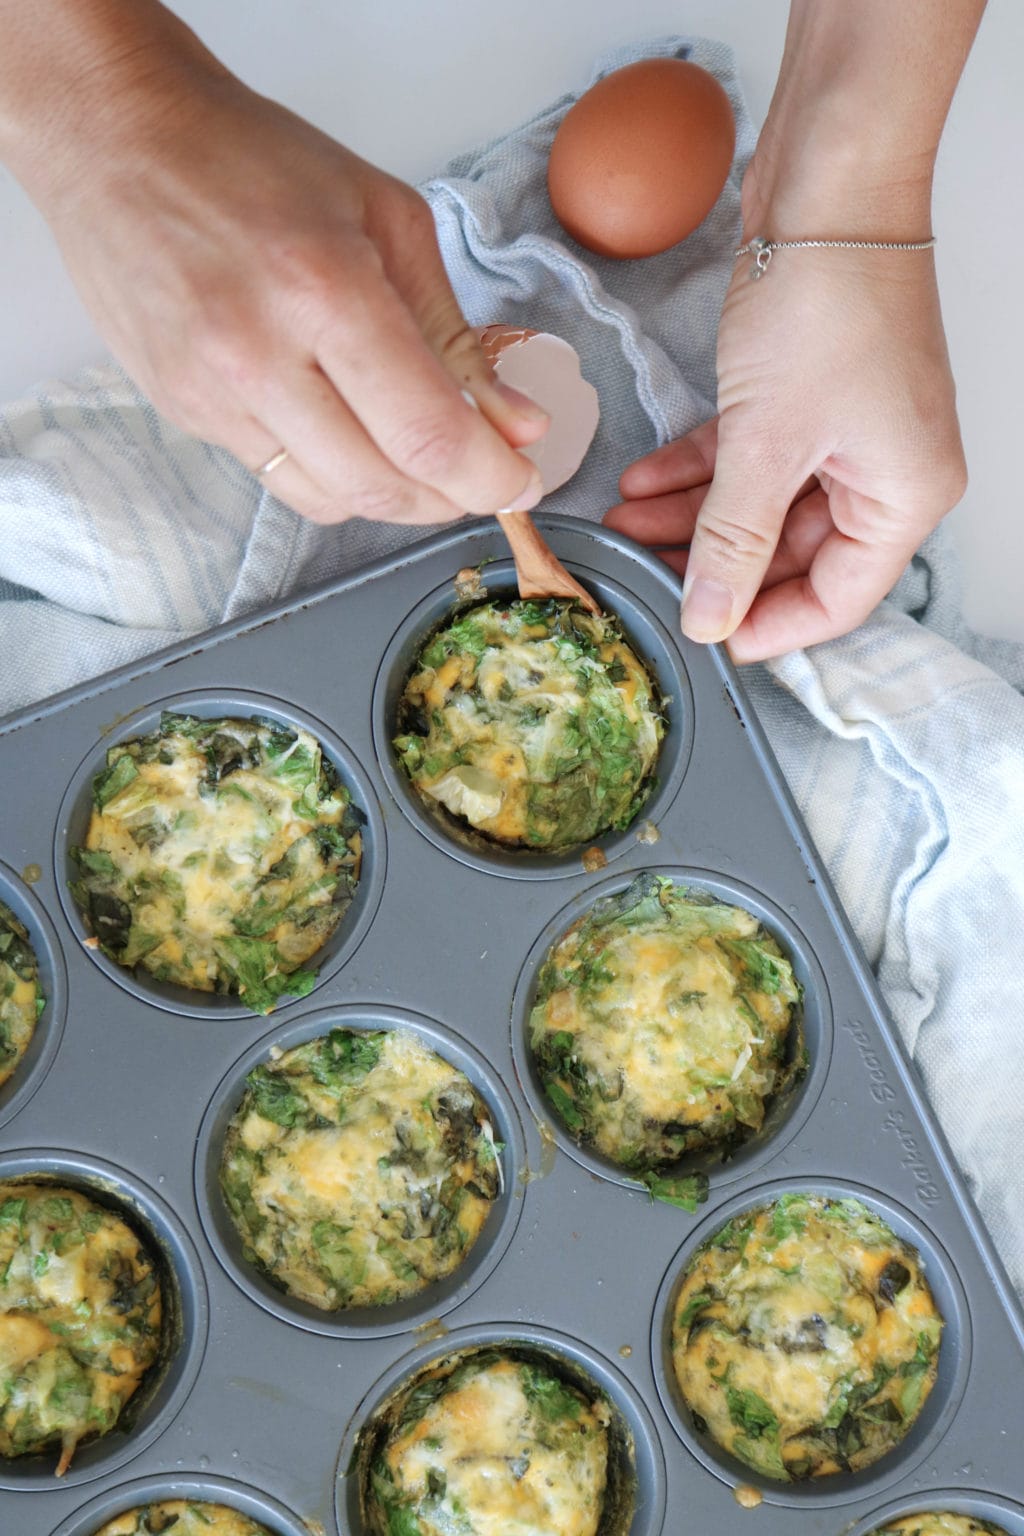 Muffin tin frittatas with eggs cheese and mushrooms are in a muffin tinlaid over a blue tea towel. Cracked egg shells are on the side and a woman's hand is scooping one of the frittatas out with a small wooden spoon